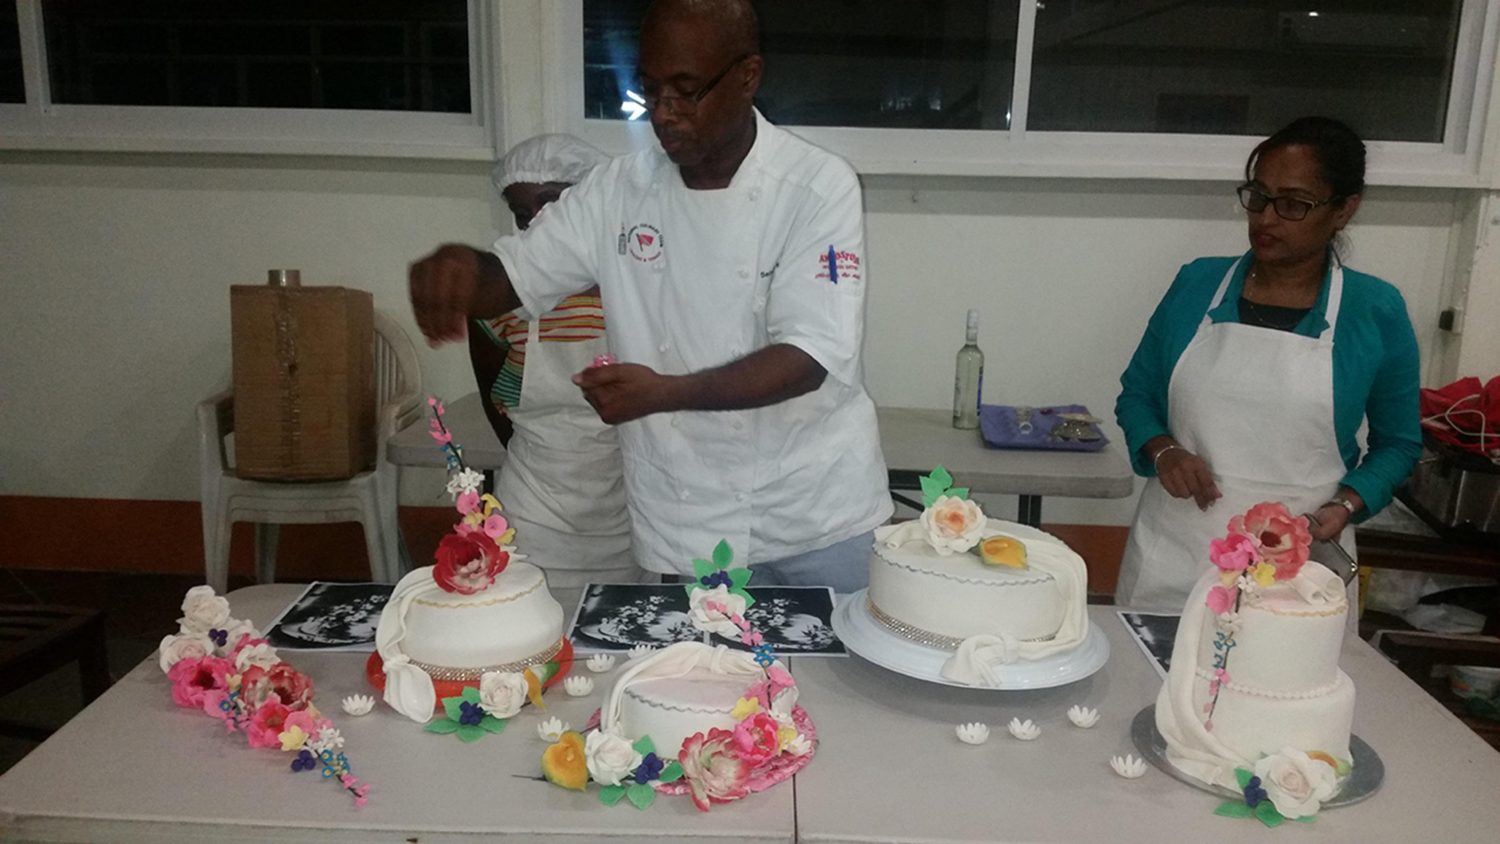 Experiencing the fabulous art of cake-making